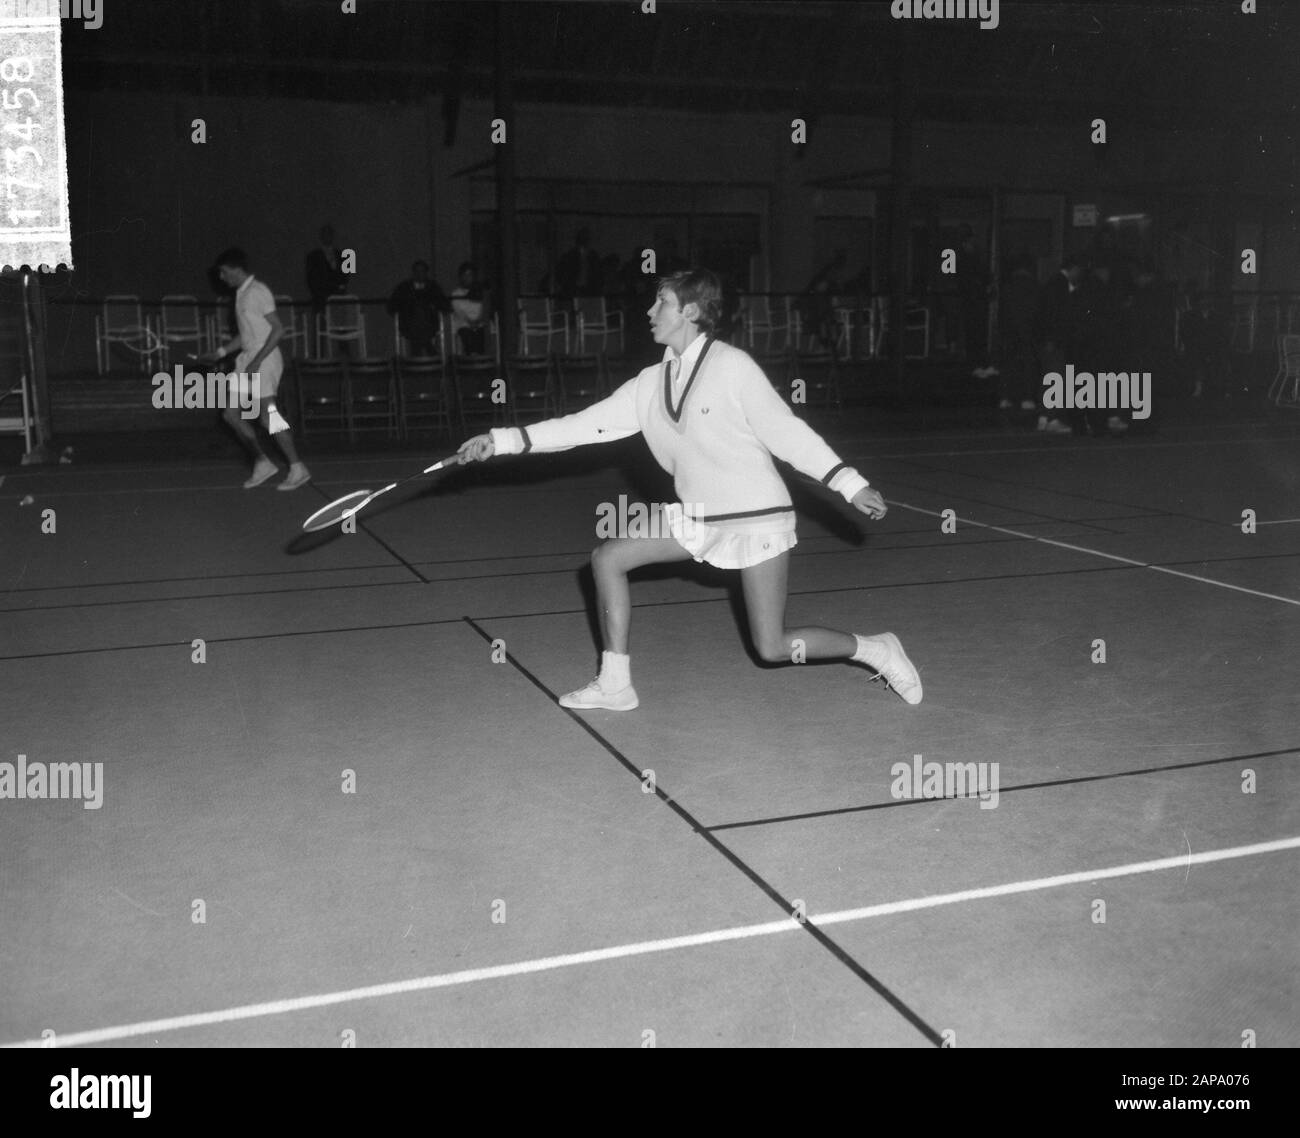 Benelux badminton tournament in tennis park Marlot in The Hague Date: 16  january 1965 Location: The Hague, Zuid-Holland Keywords: tennis Stock Photo  - Alamy